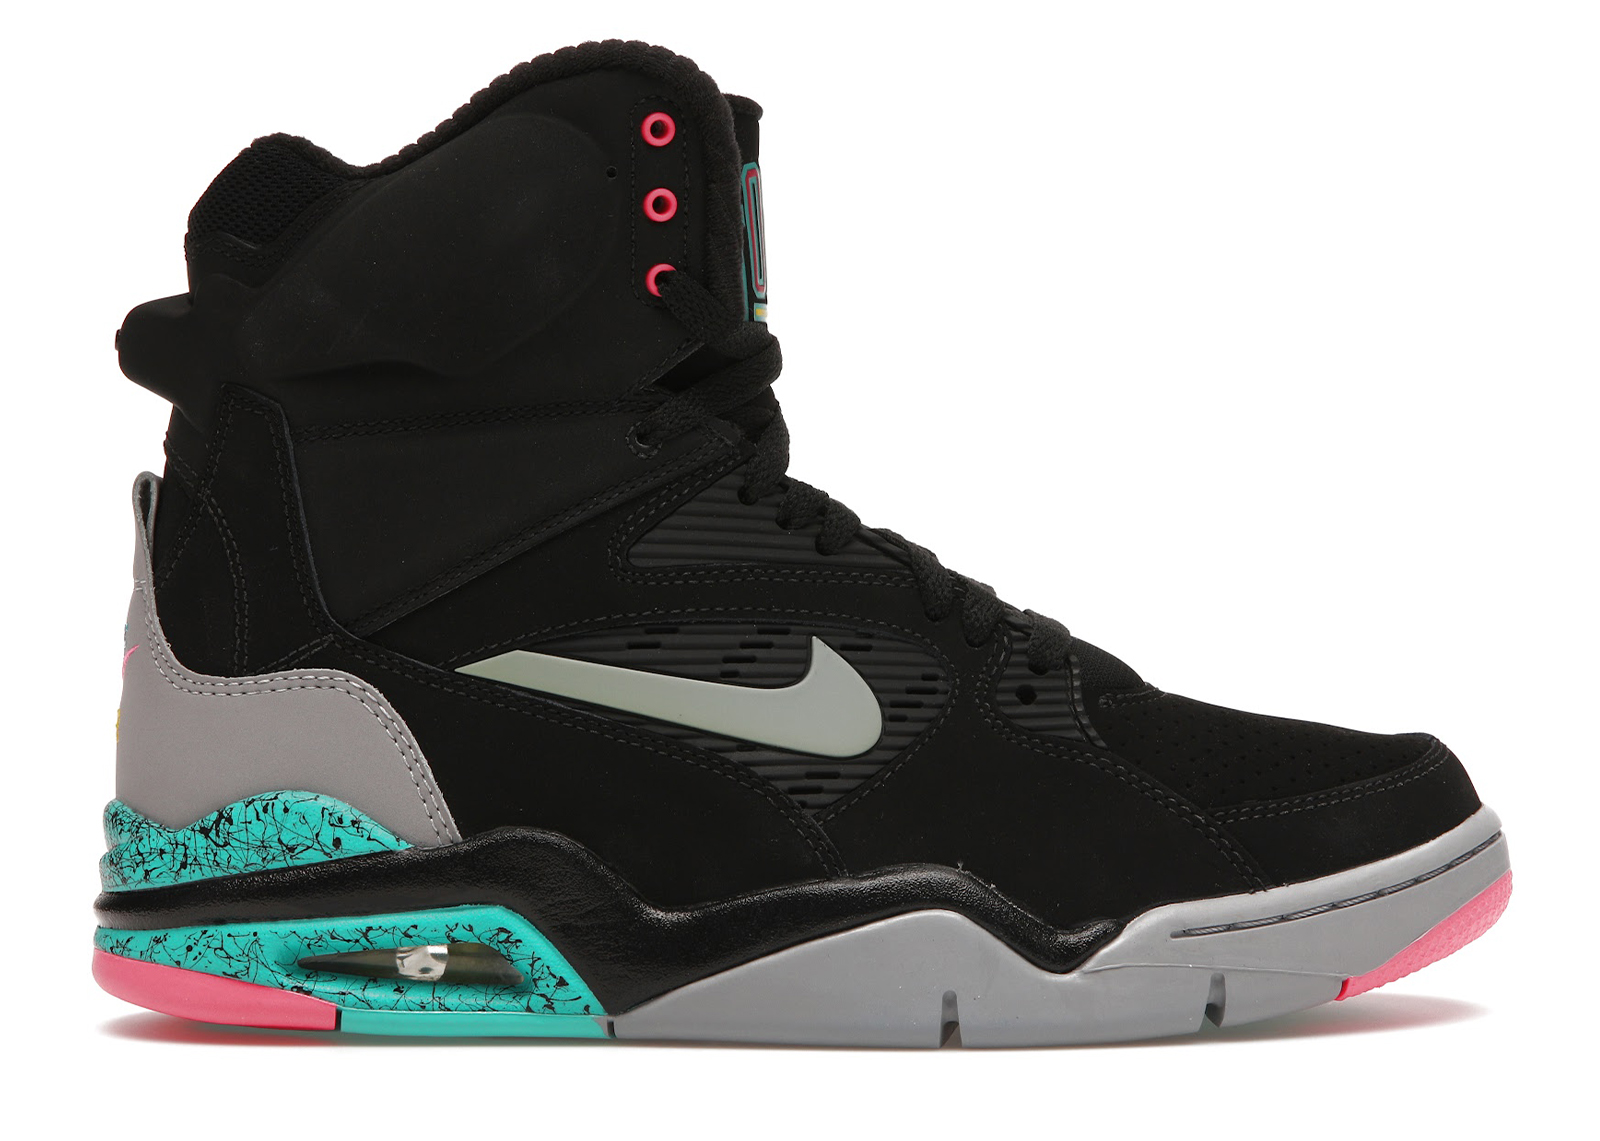 Nike Air Command Force Spurs